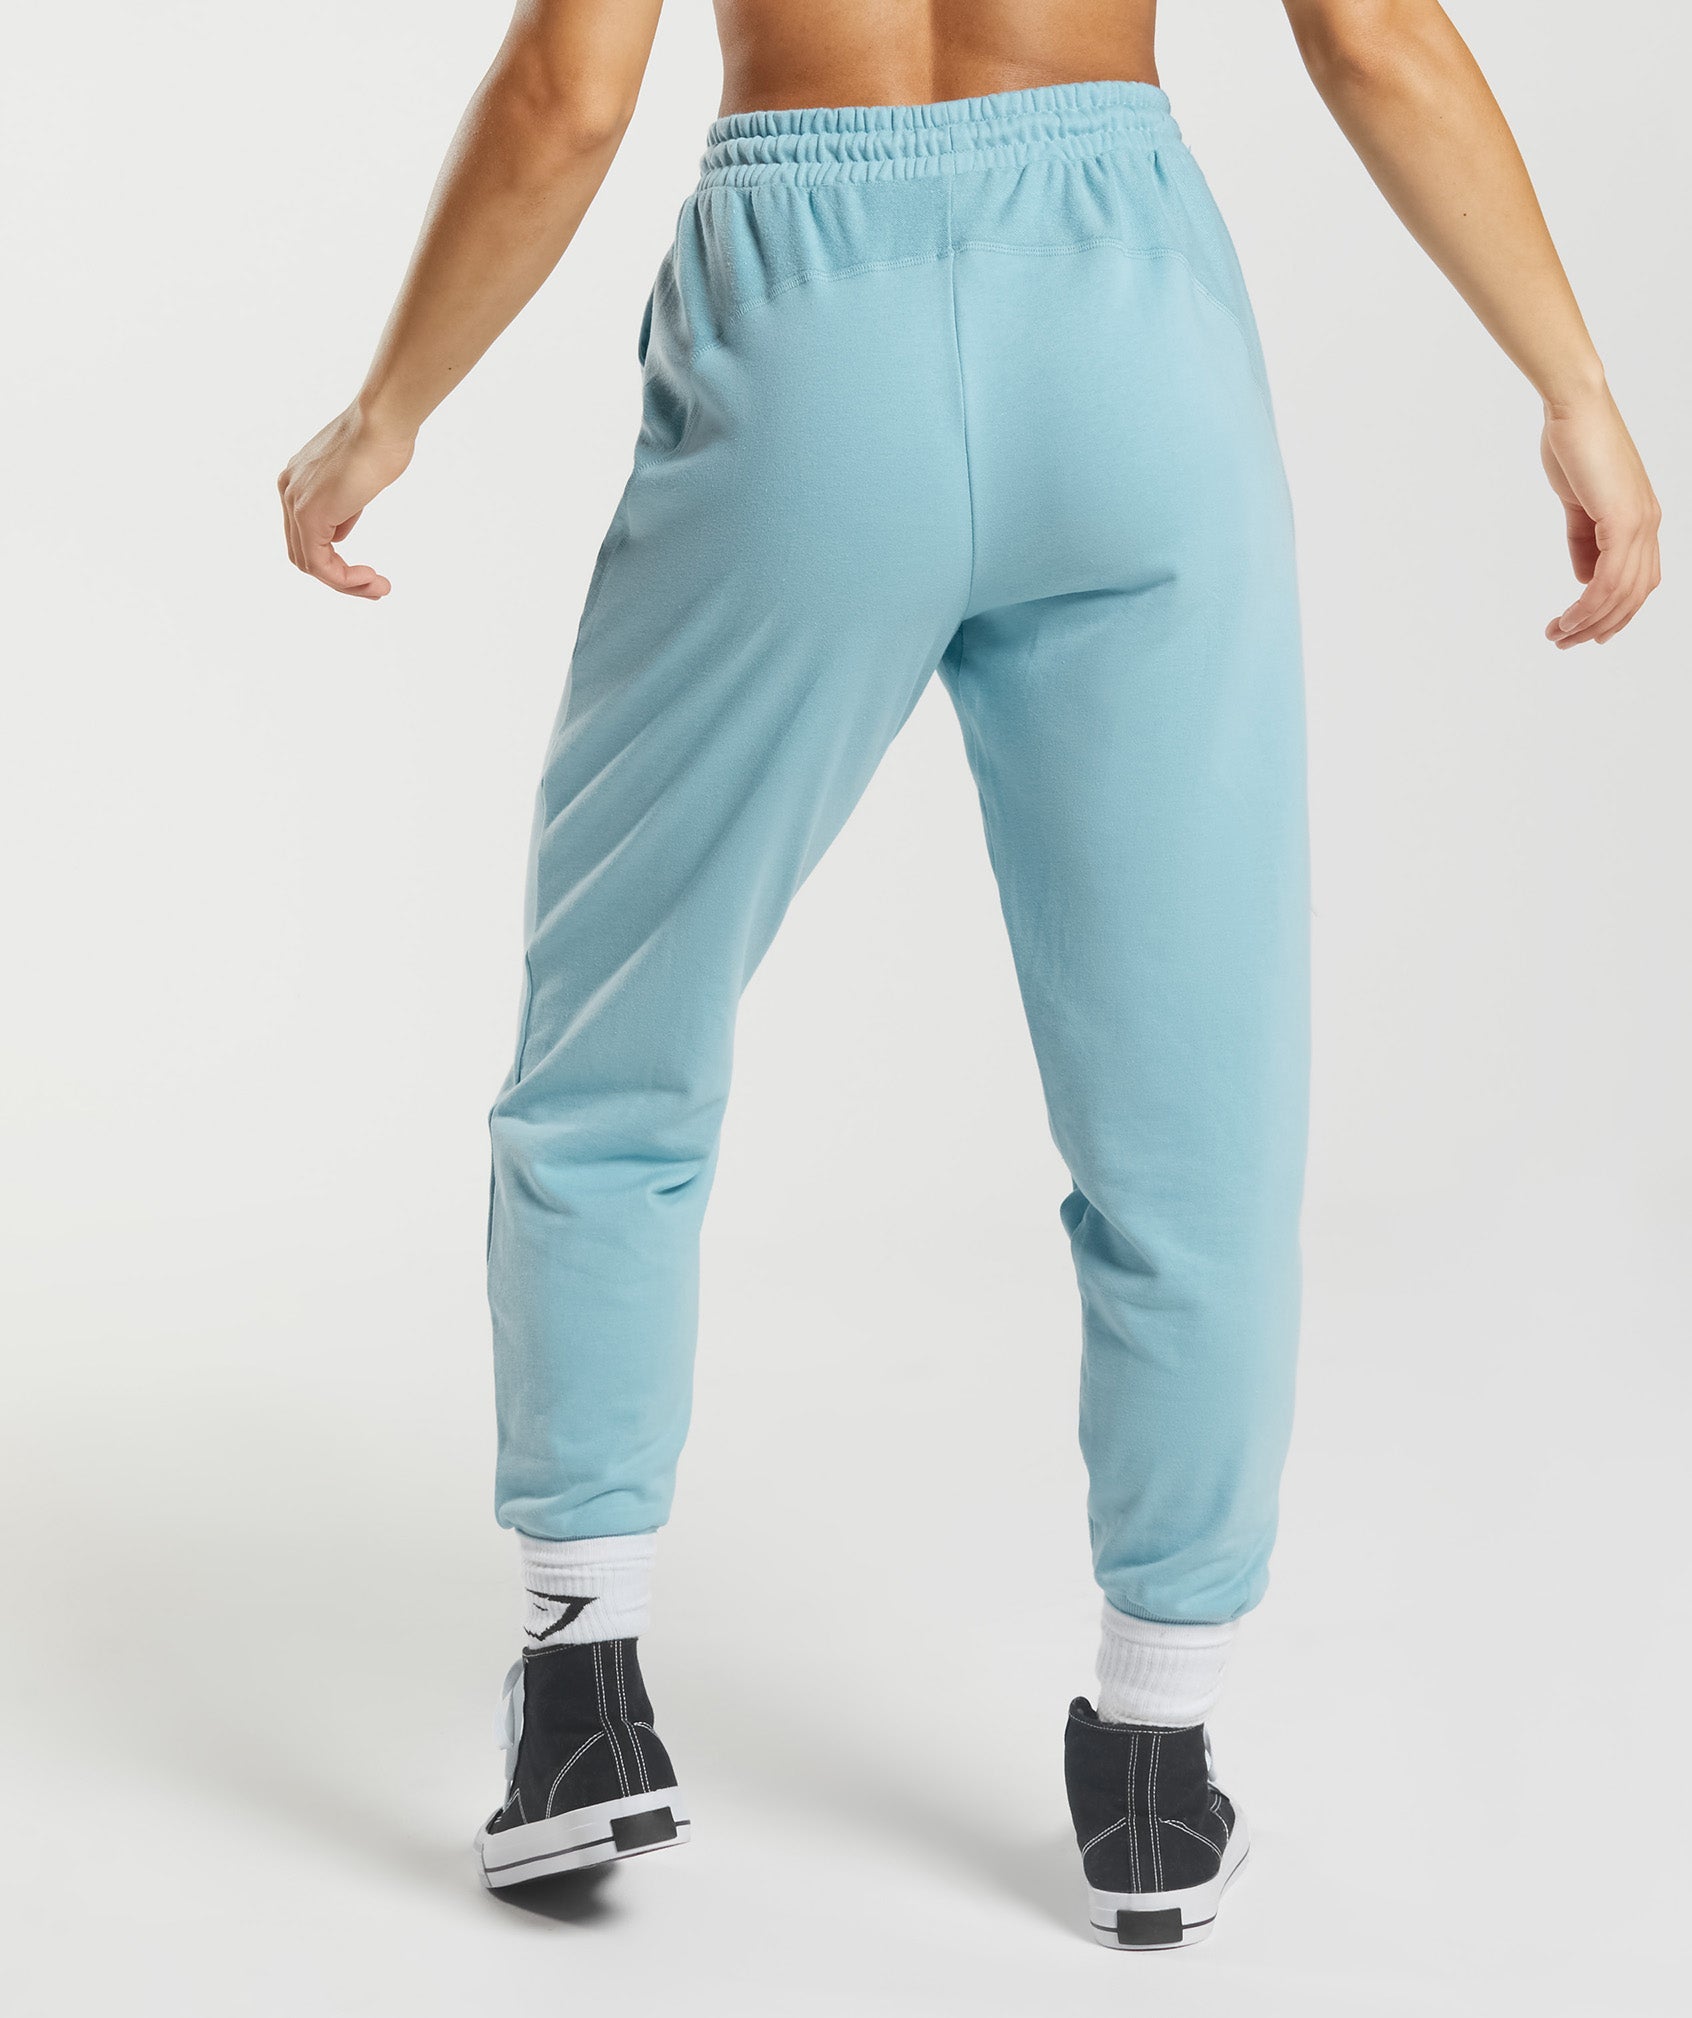 GS Power Joggers - Iceberg Blue  Womens bottoms, How to wear, Joggers